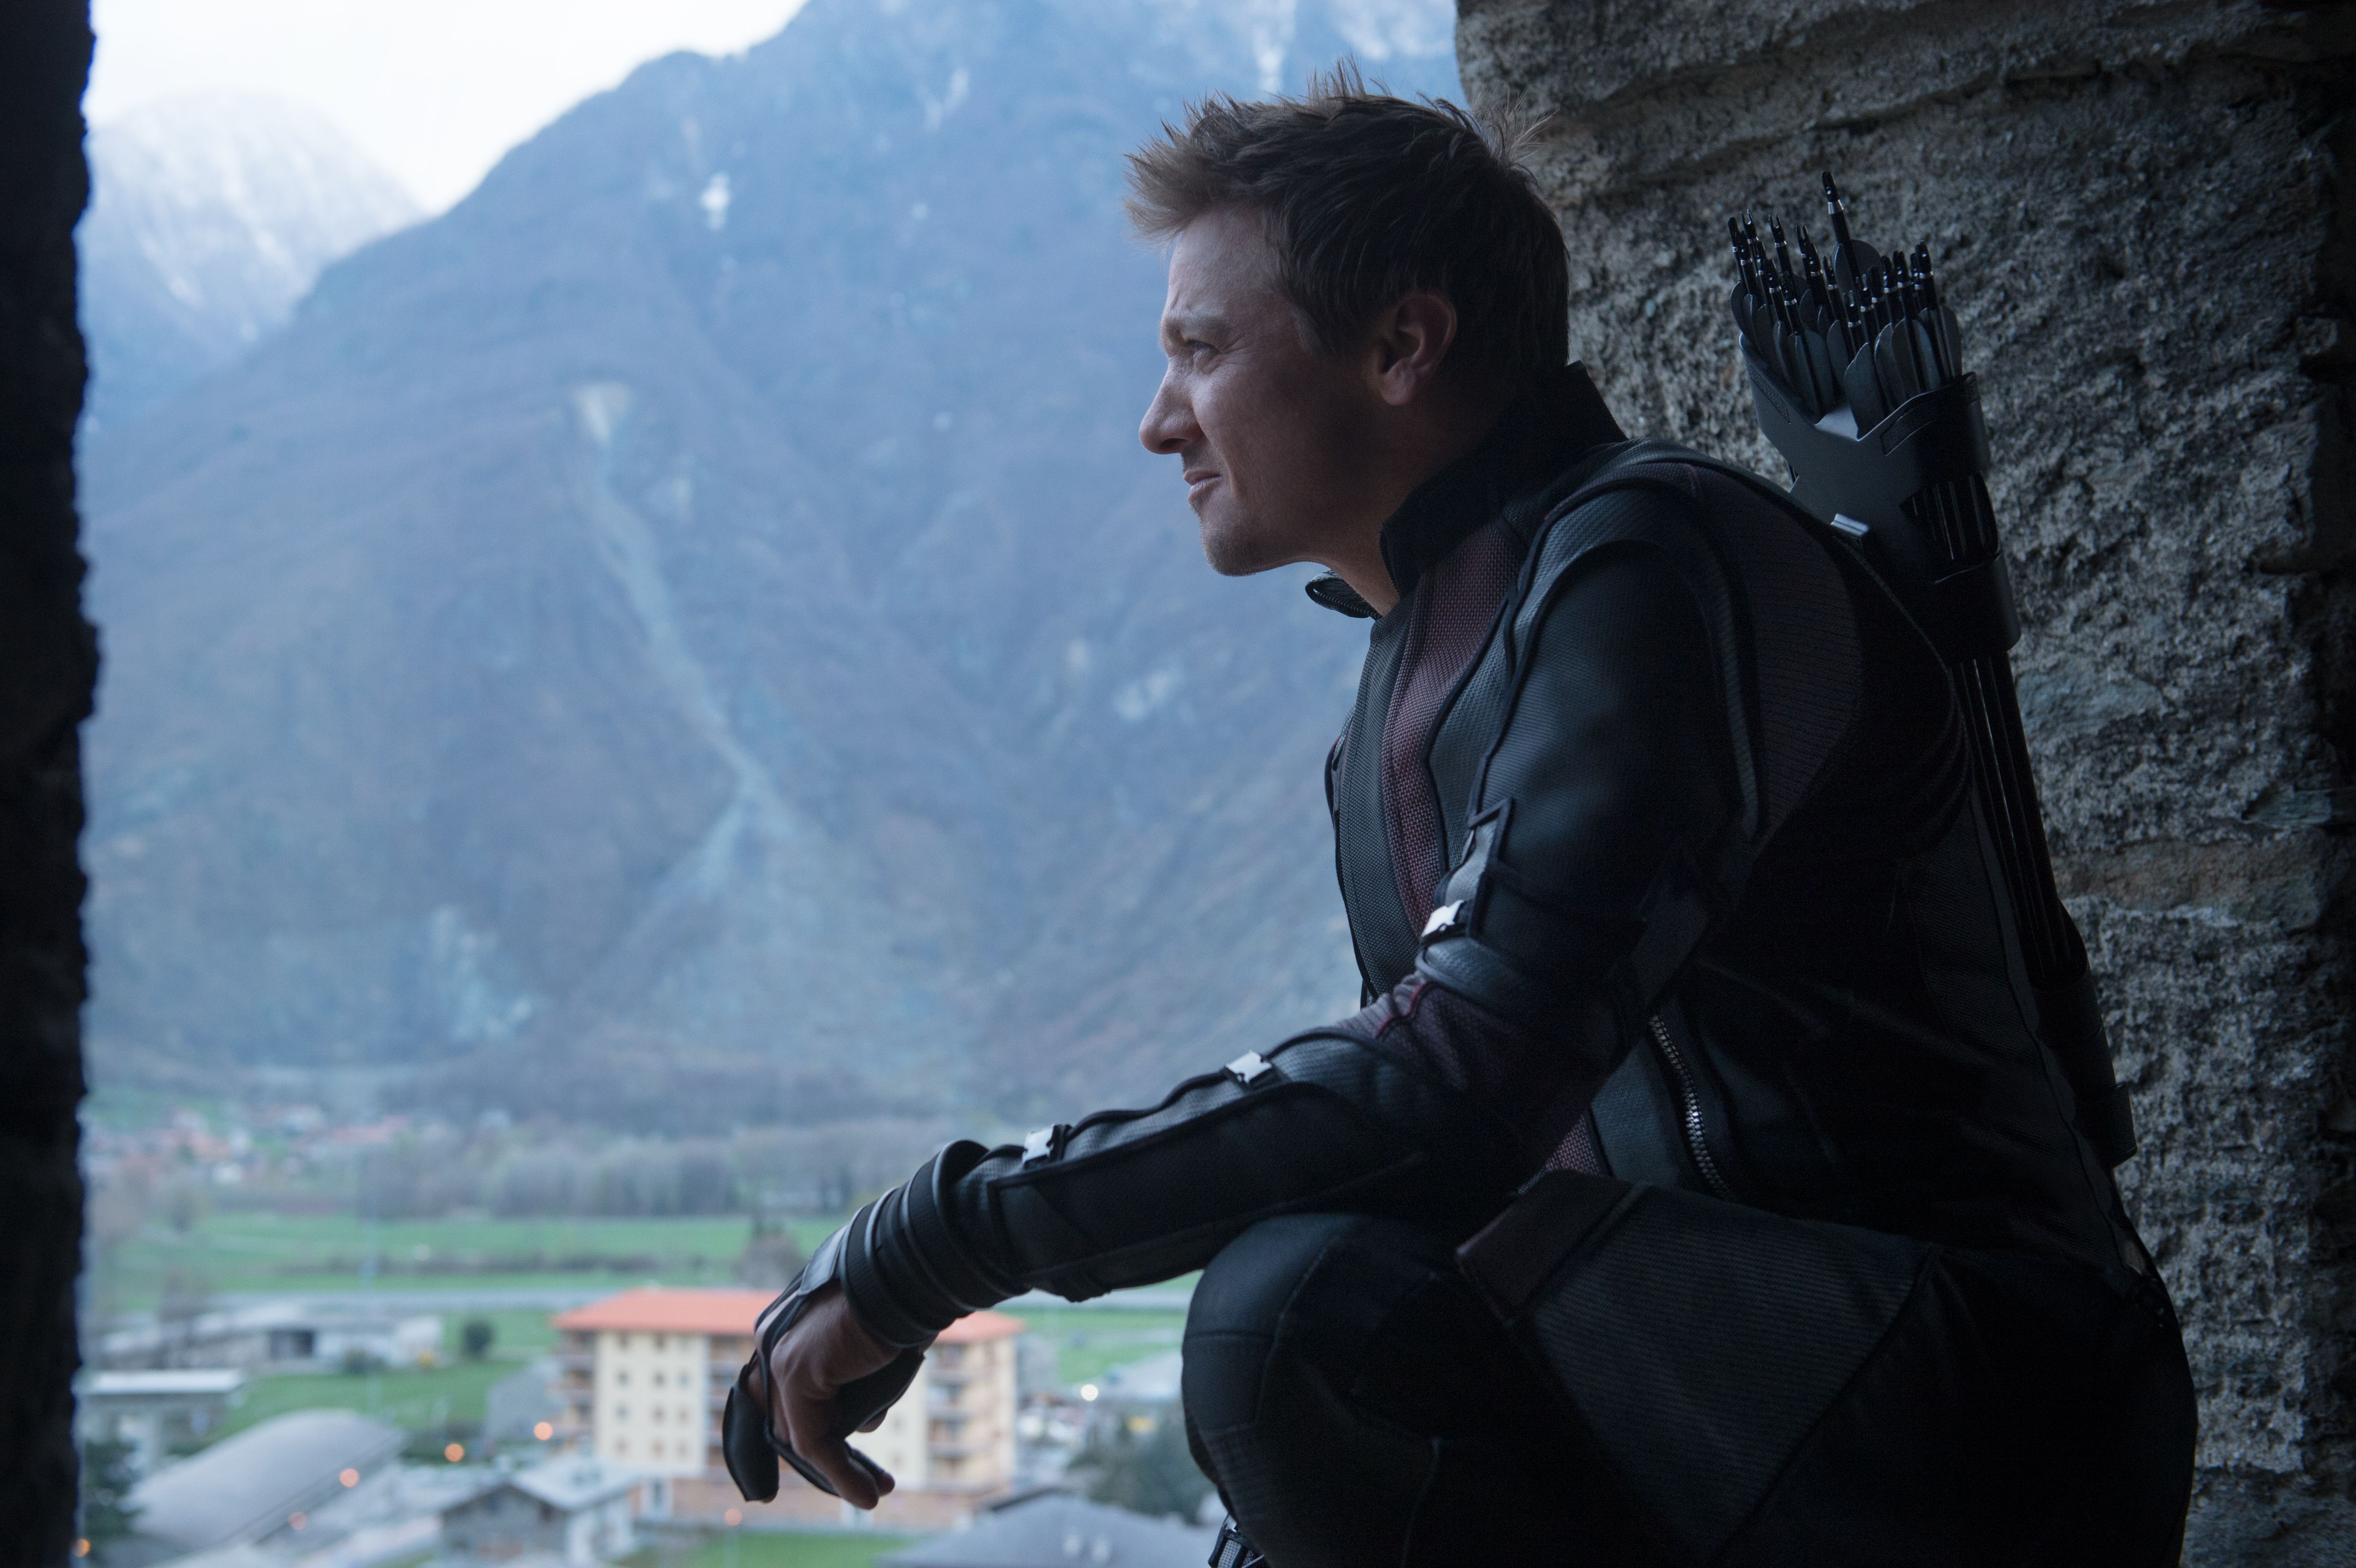 The Avengers Age of Ultron Photo 2